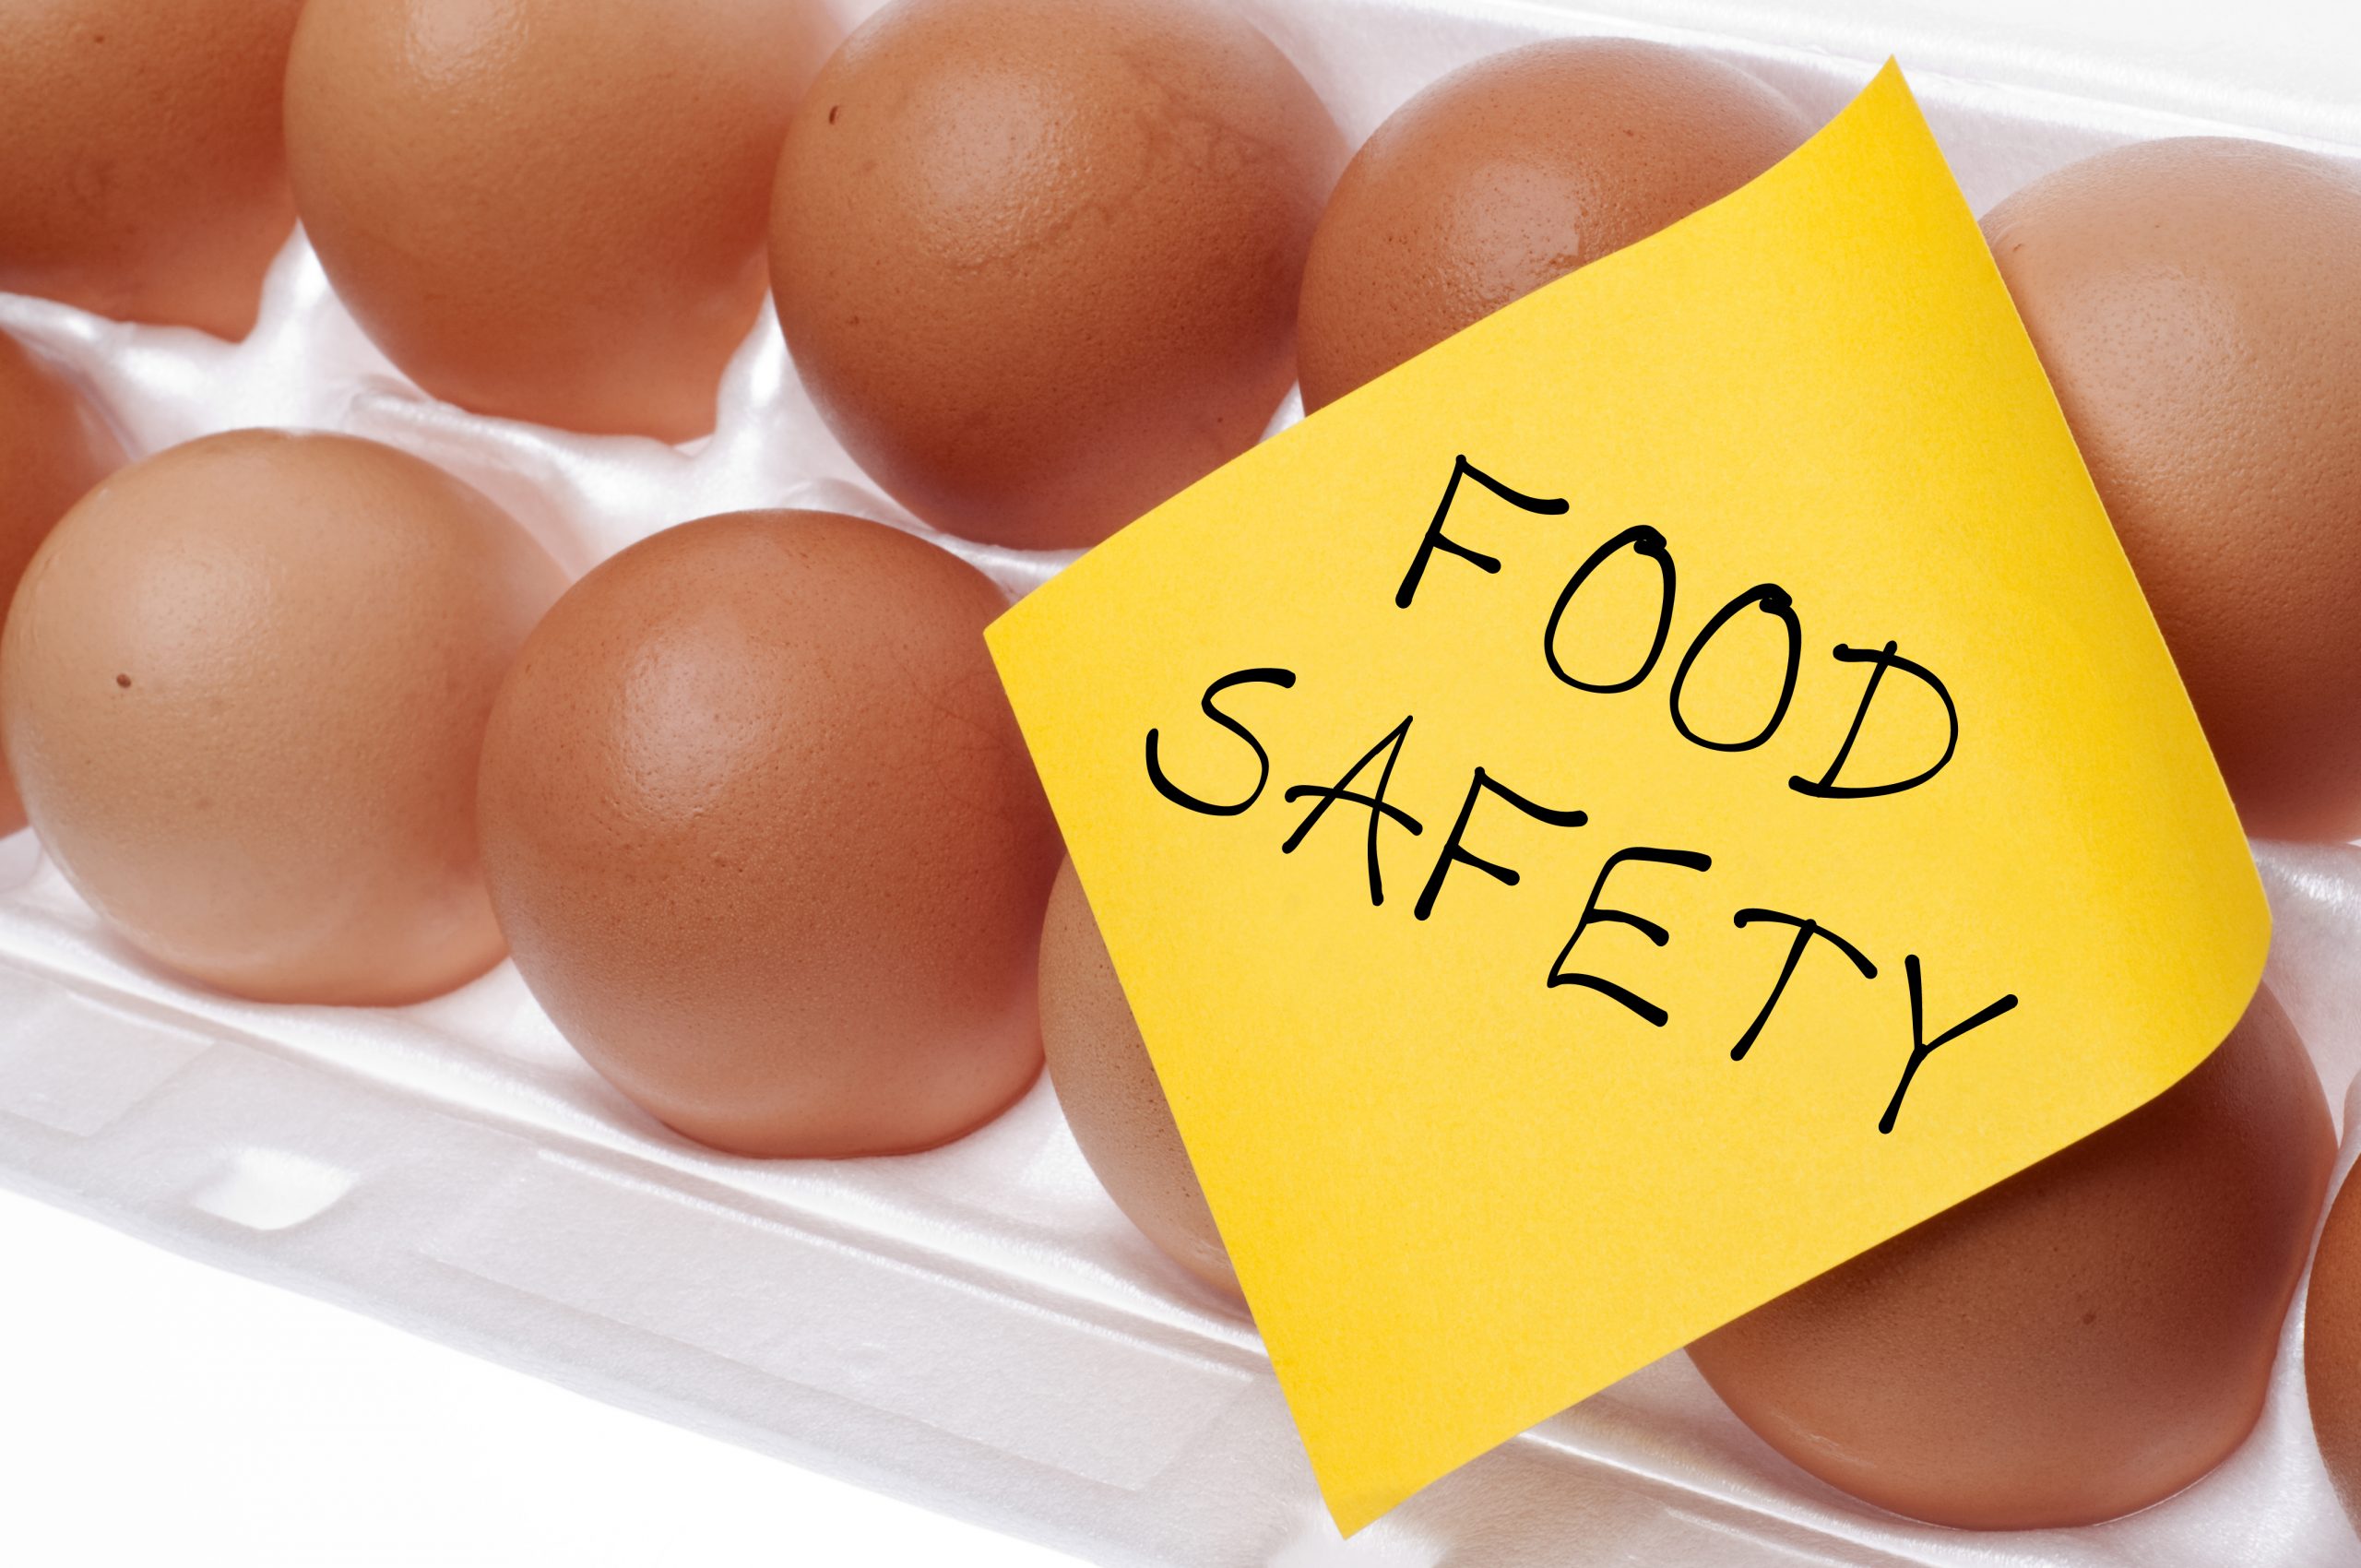 Are You Prepared for Recalls and Outbreaks in Your Food Preps?